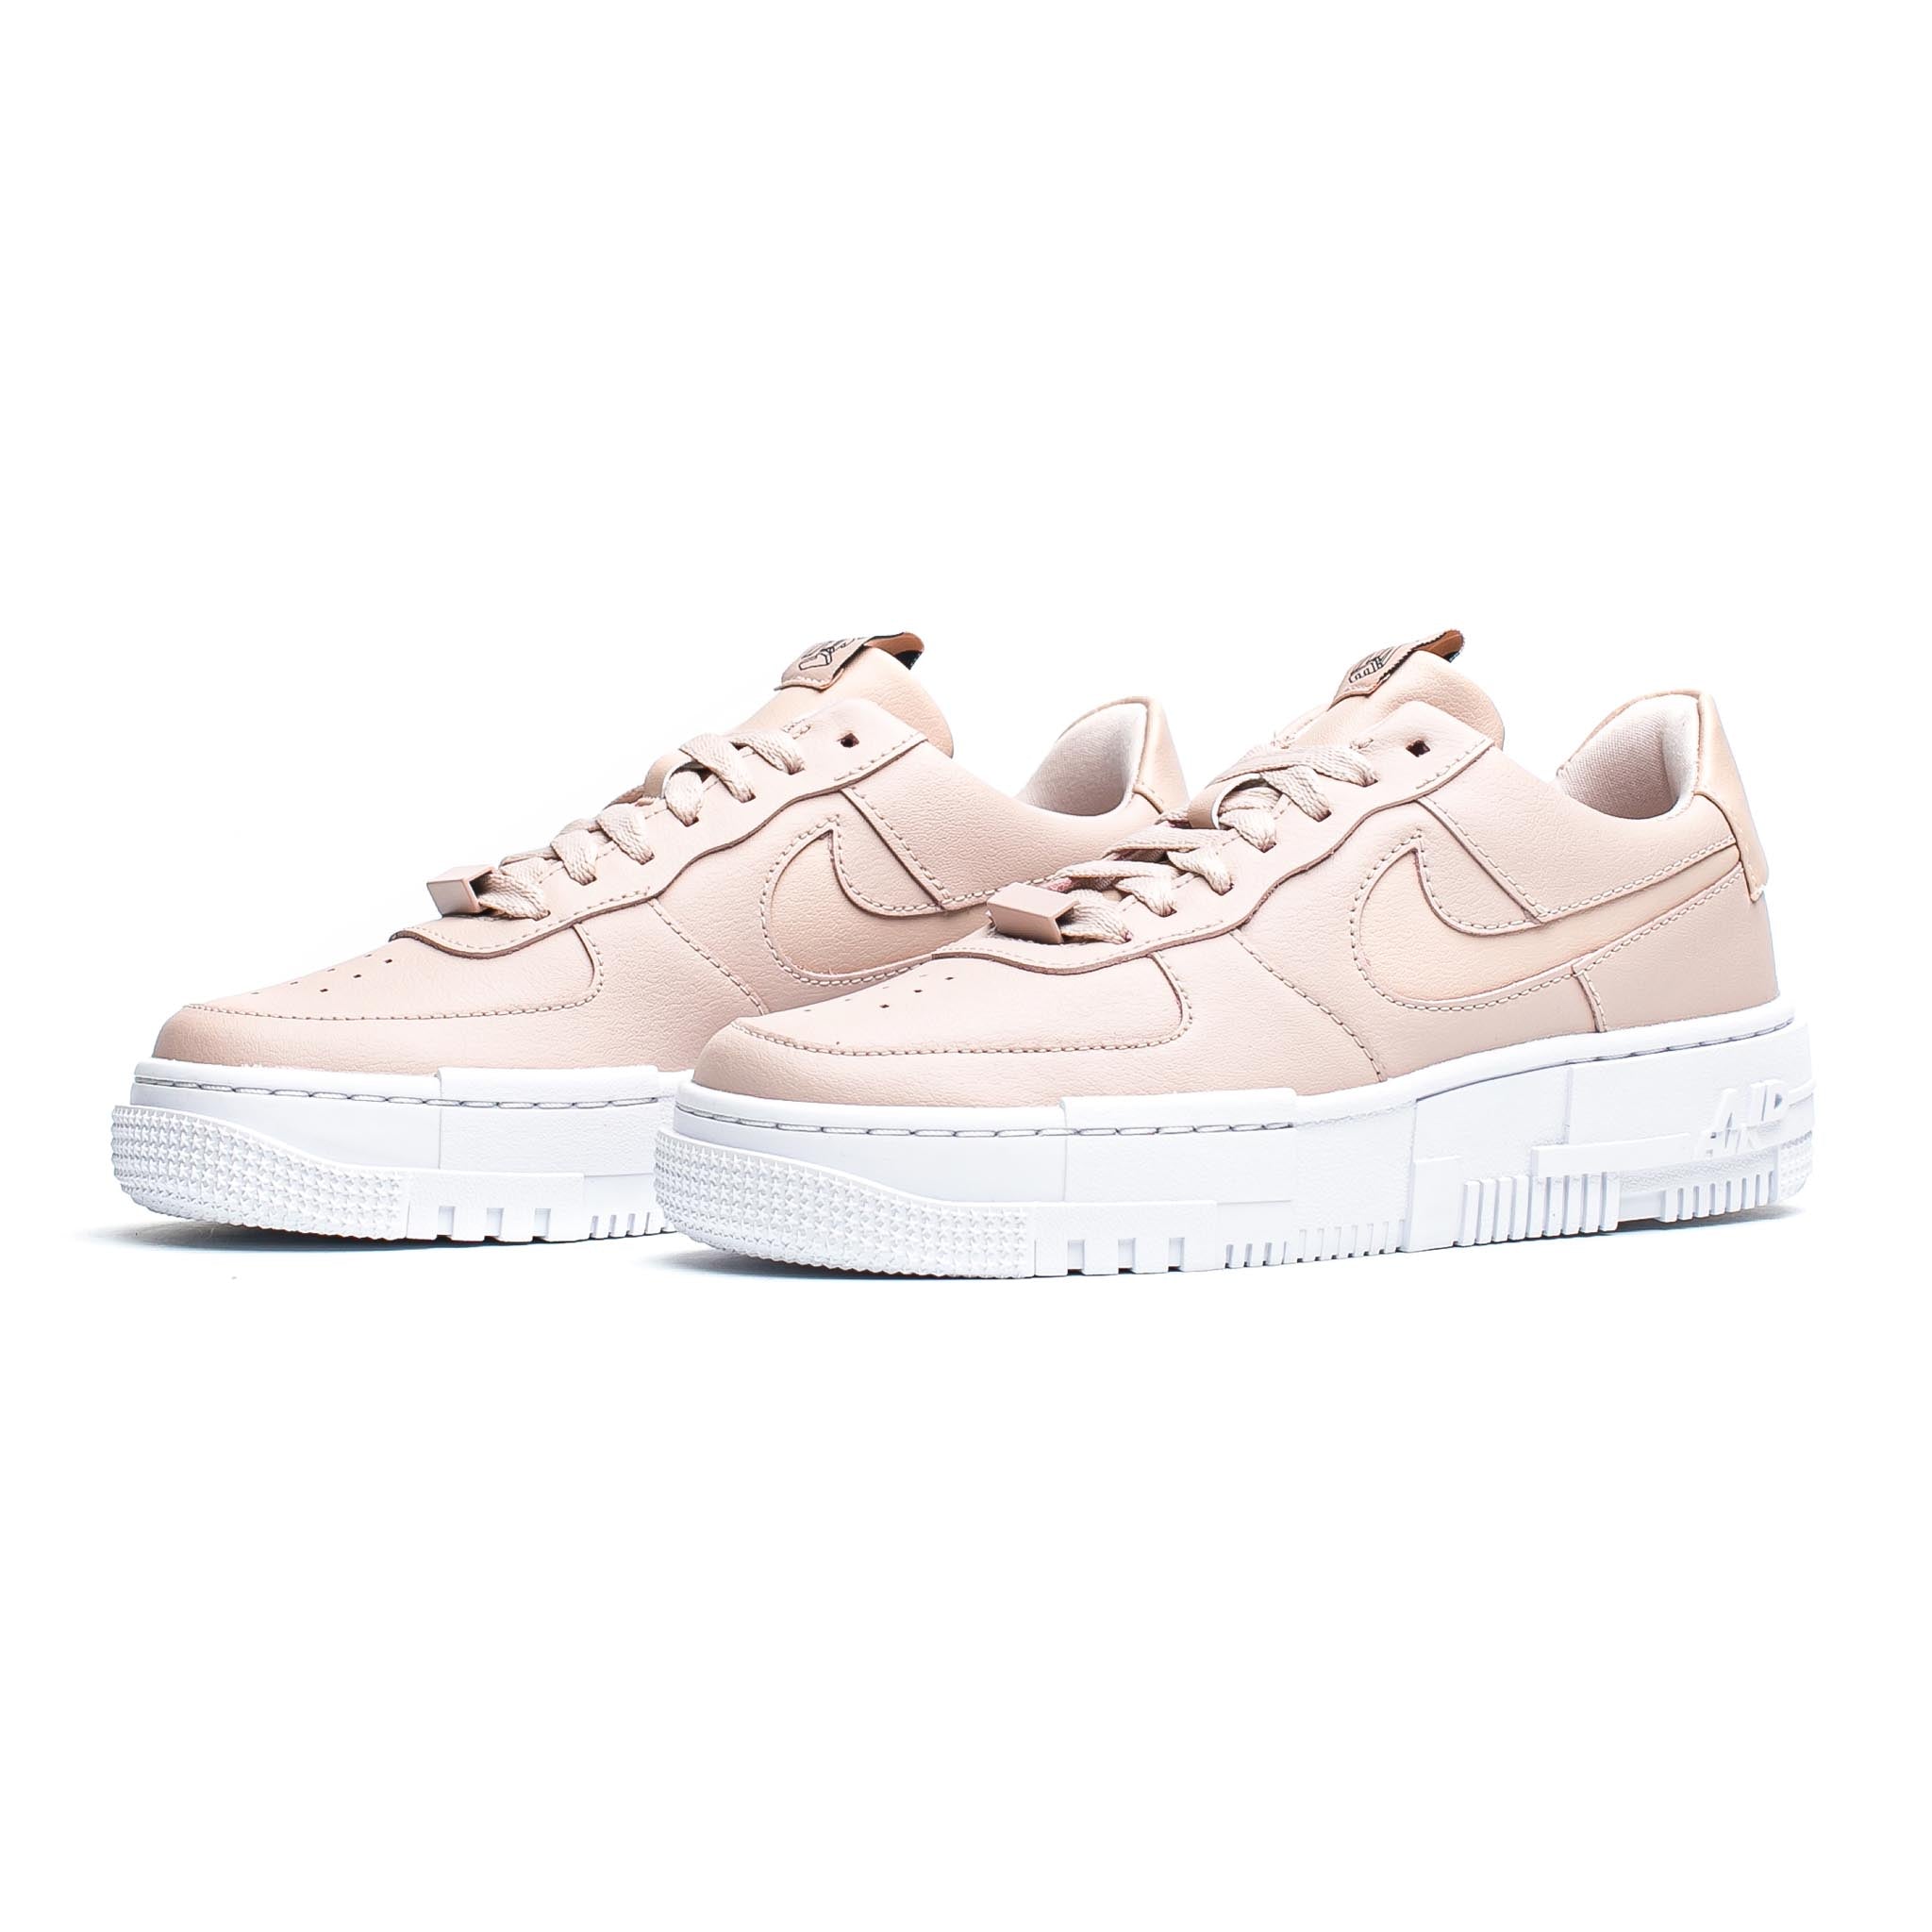 Nike Air Force 1 Pixel 'Particle Beige'